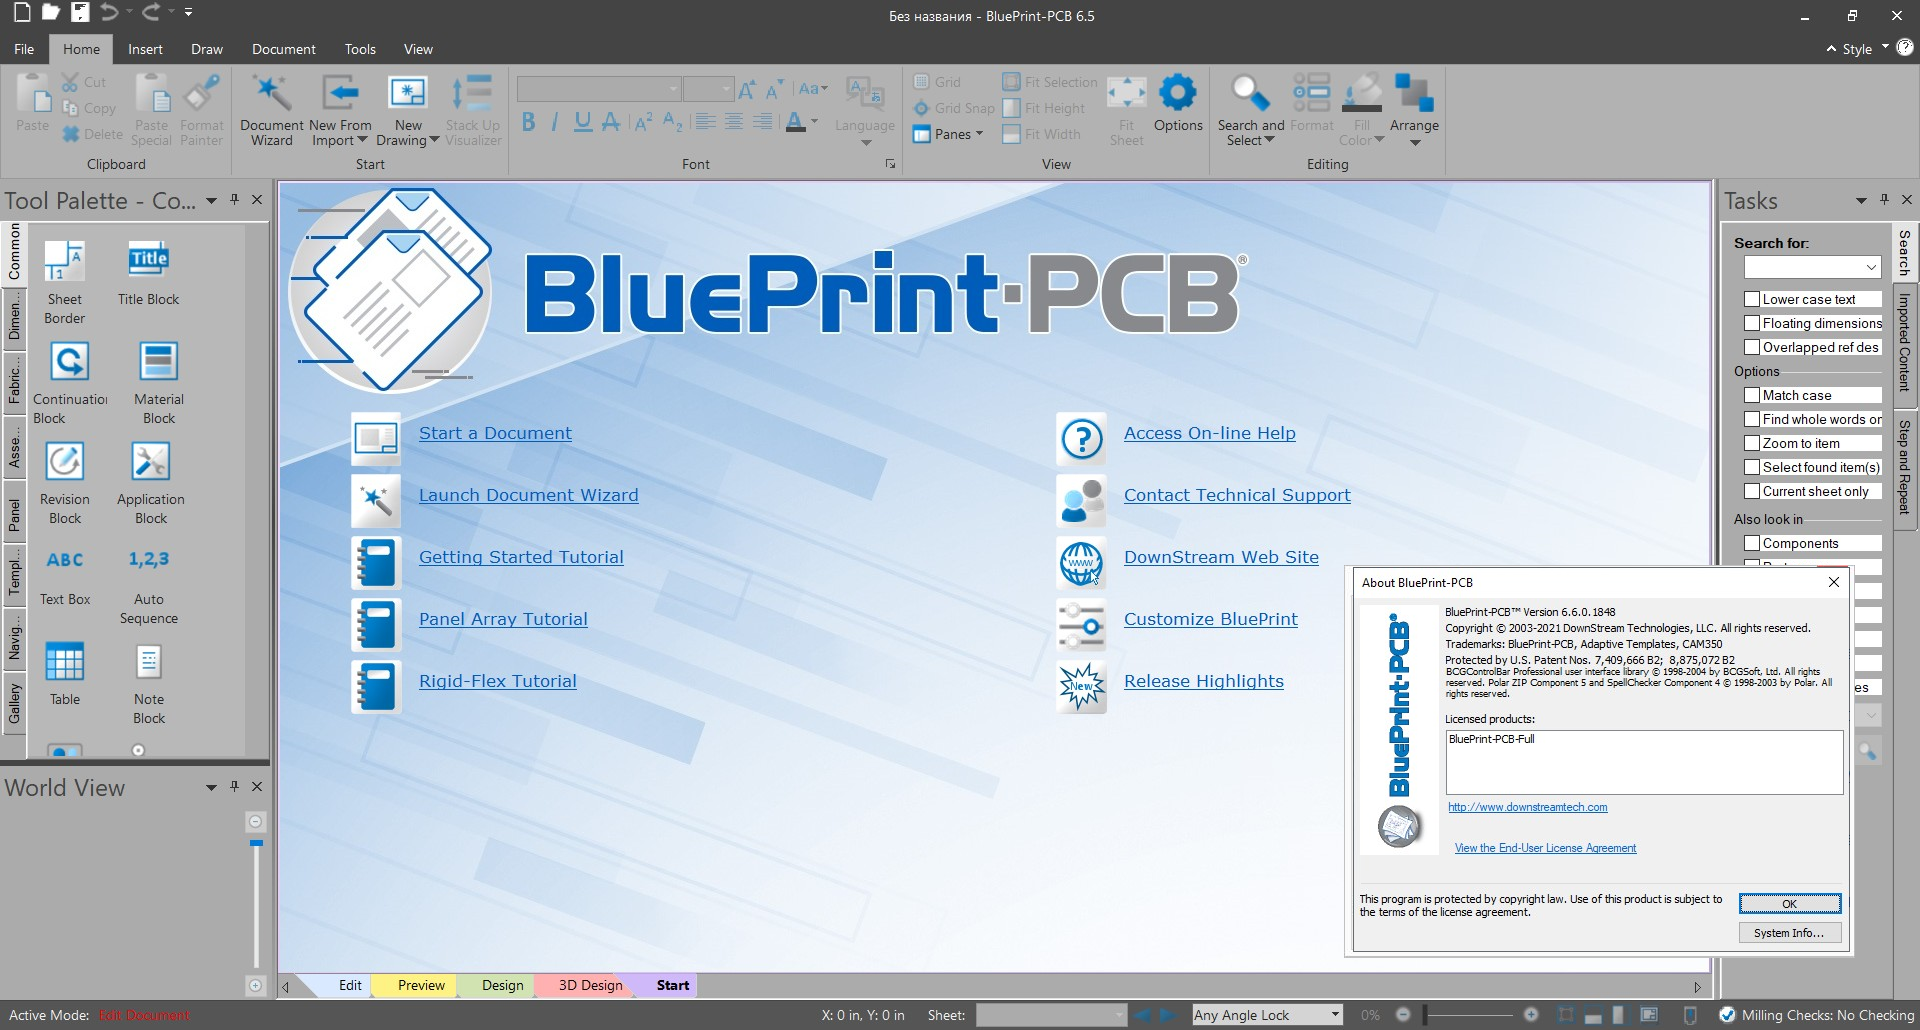 Working with DownStream Technologies CAM350-DFMStream 14.6 & BluePrint-PCB 6.6 build 1864